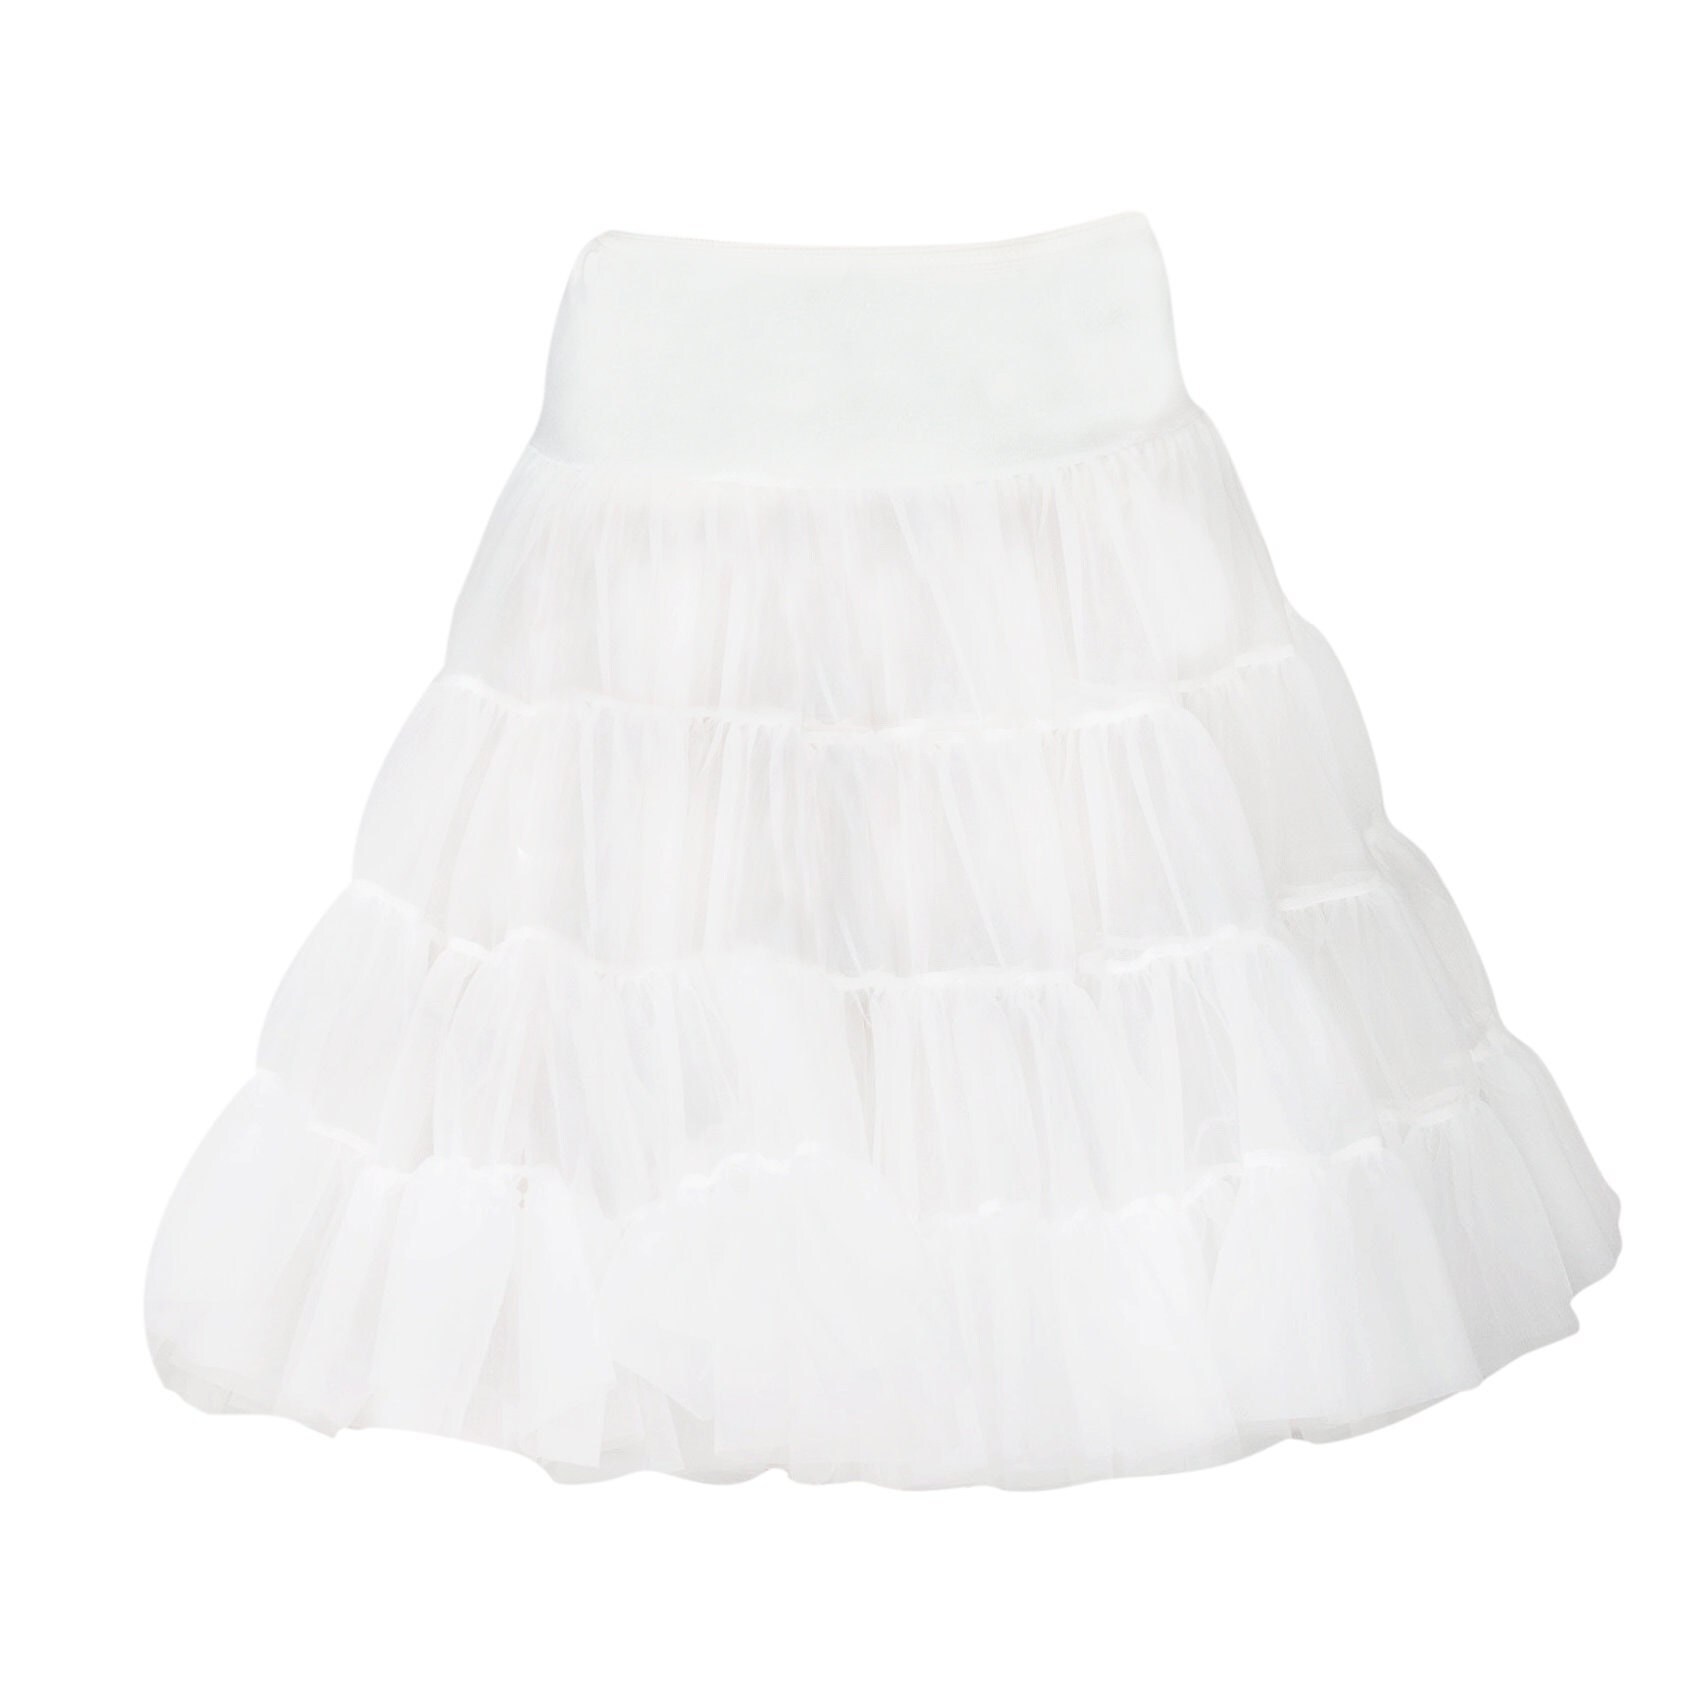 Buy Miss Model Candyland Petticoat Dress for Girls - Underdress and Kids  White Full Slip Poodle Skirt Perfect for Formal Dress, White, 2 at